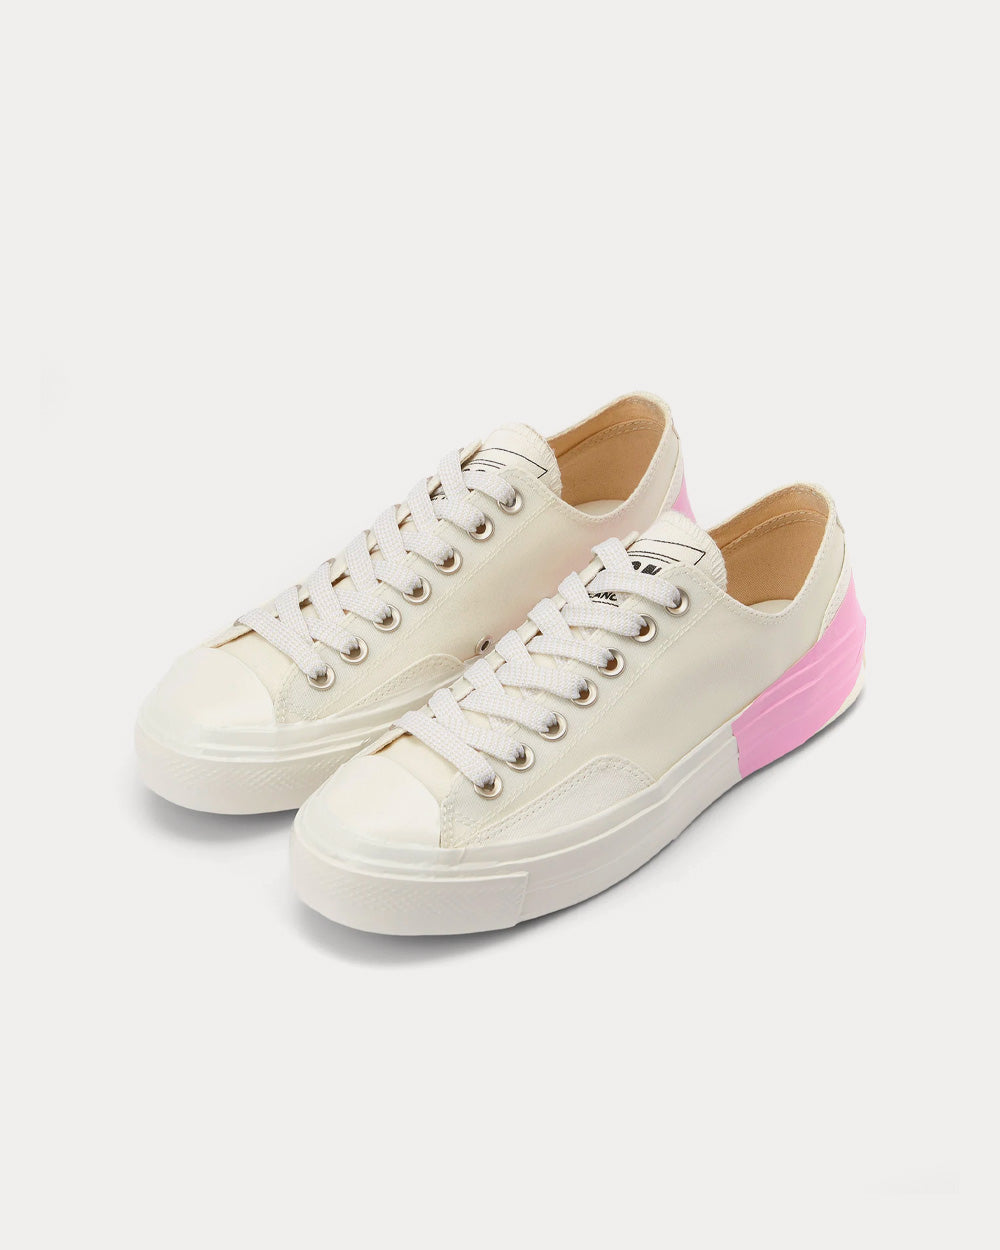 MSGM - Tape Appliqued Vulcanized Canvas White / Pink Low Top Sneakers